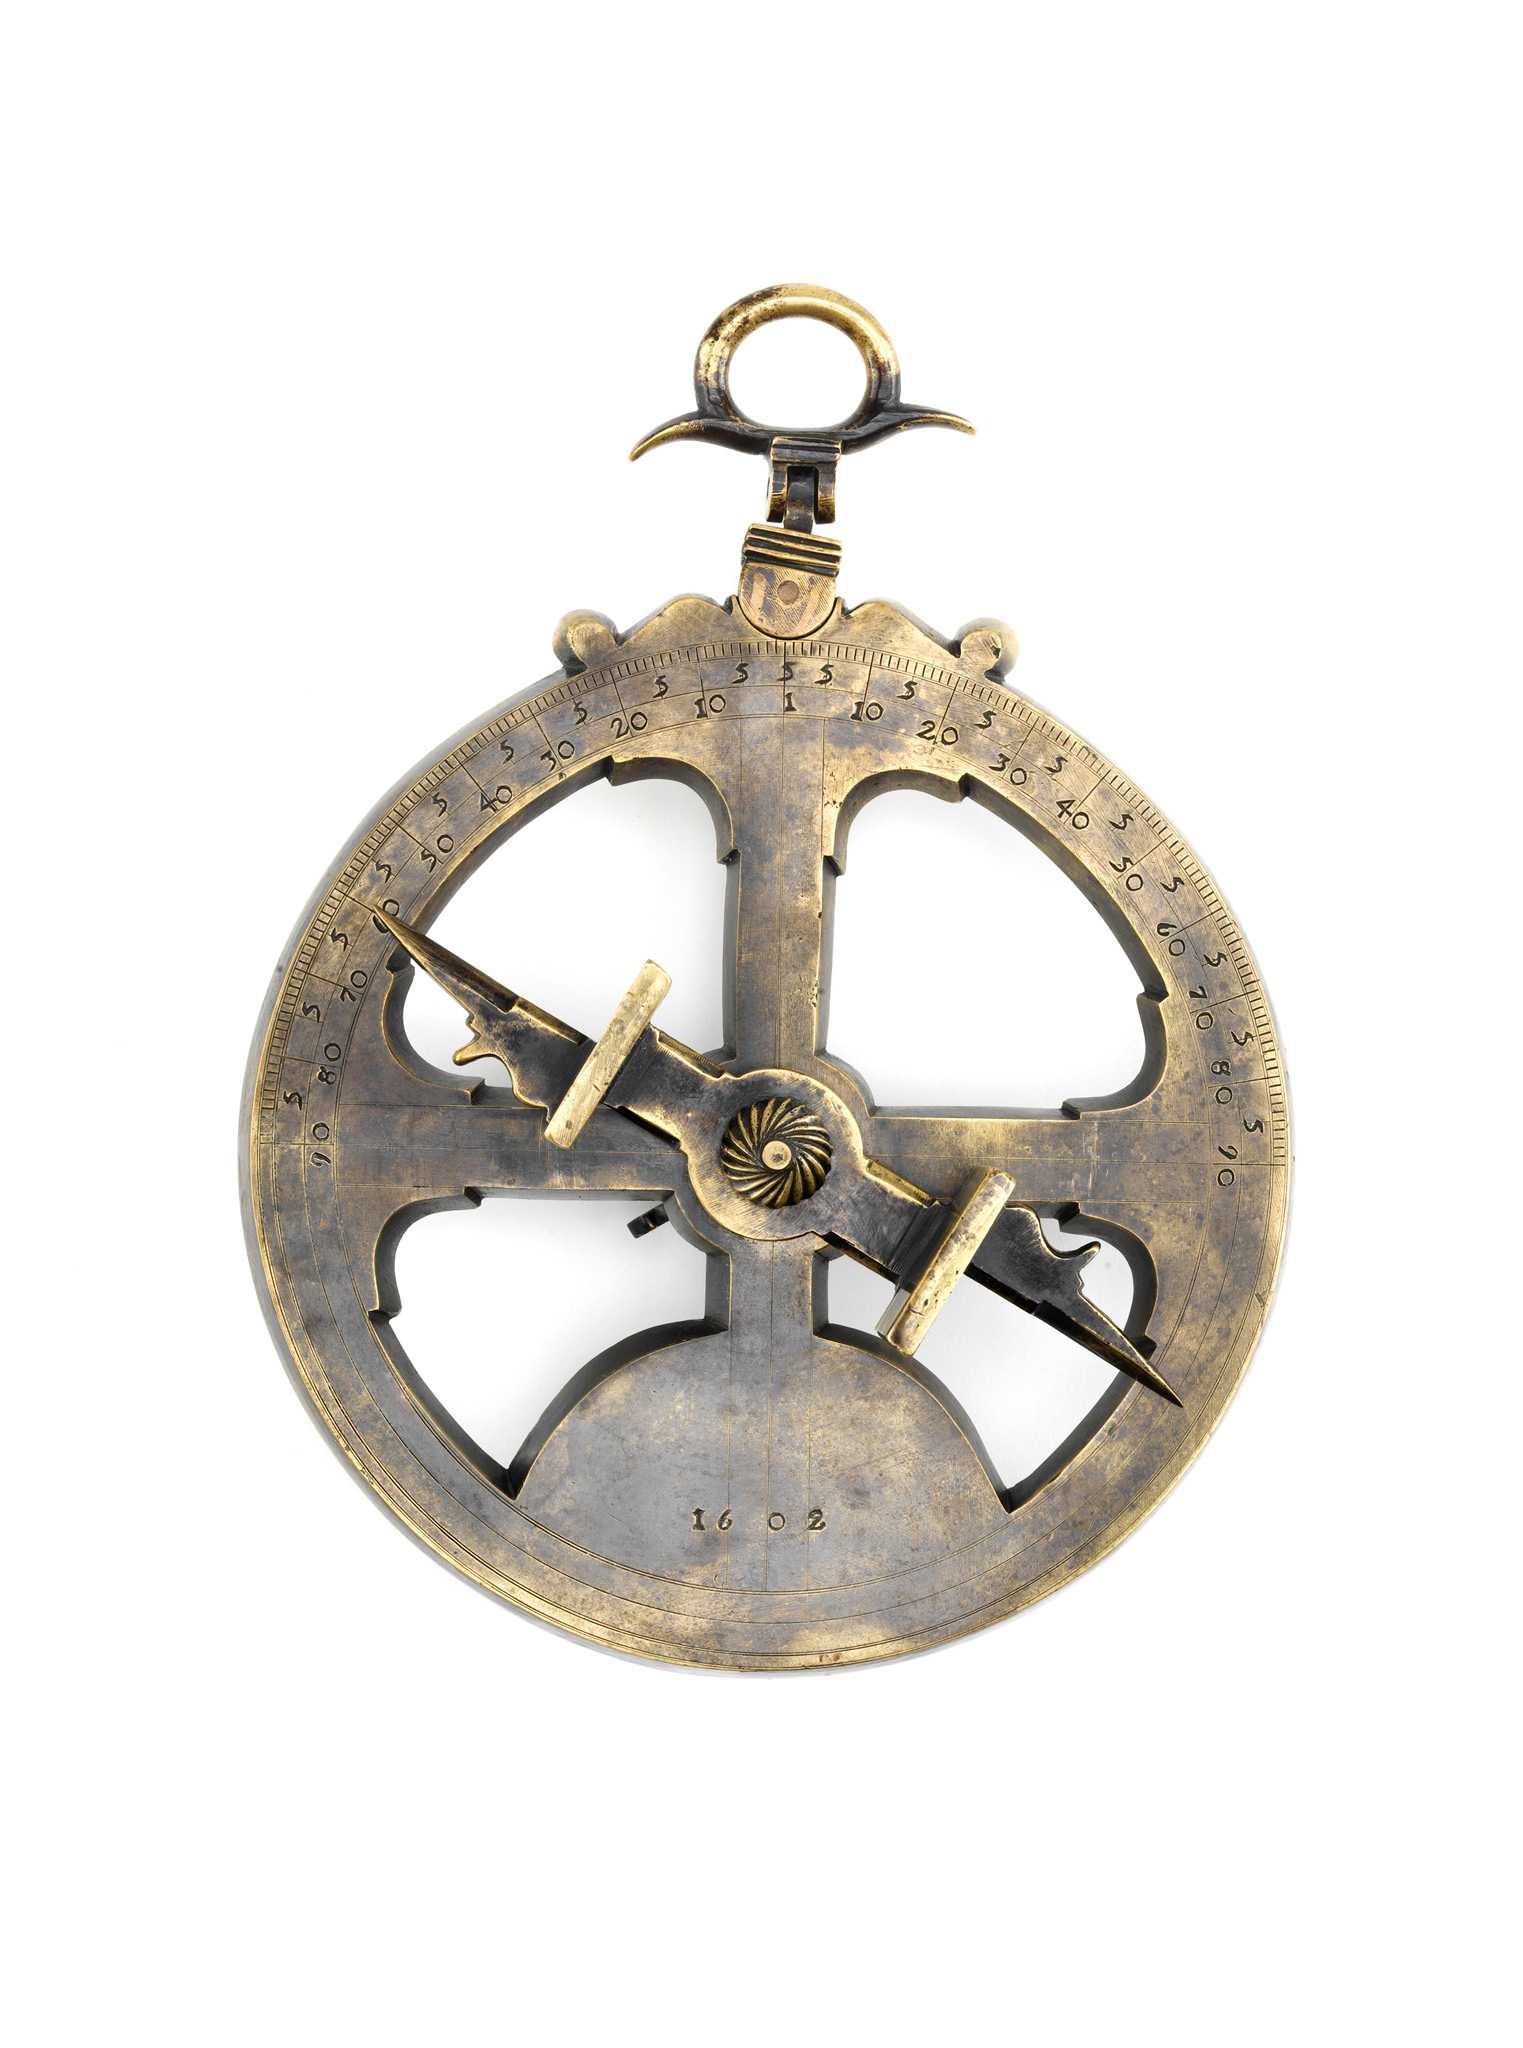 Photograph of astrolabe